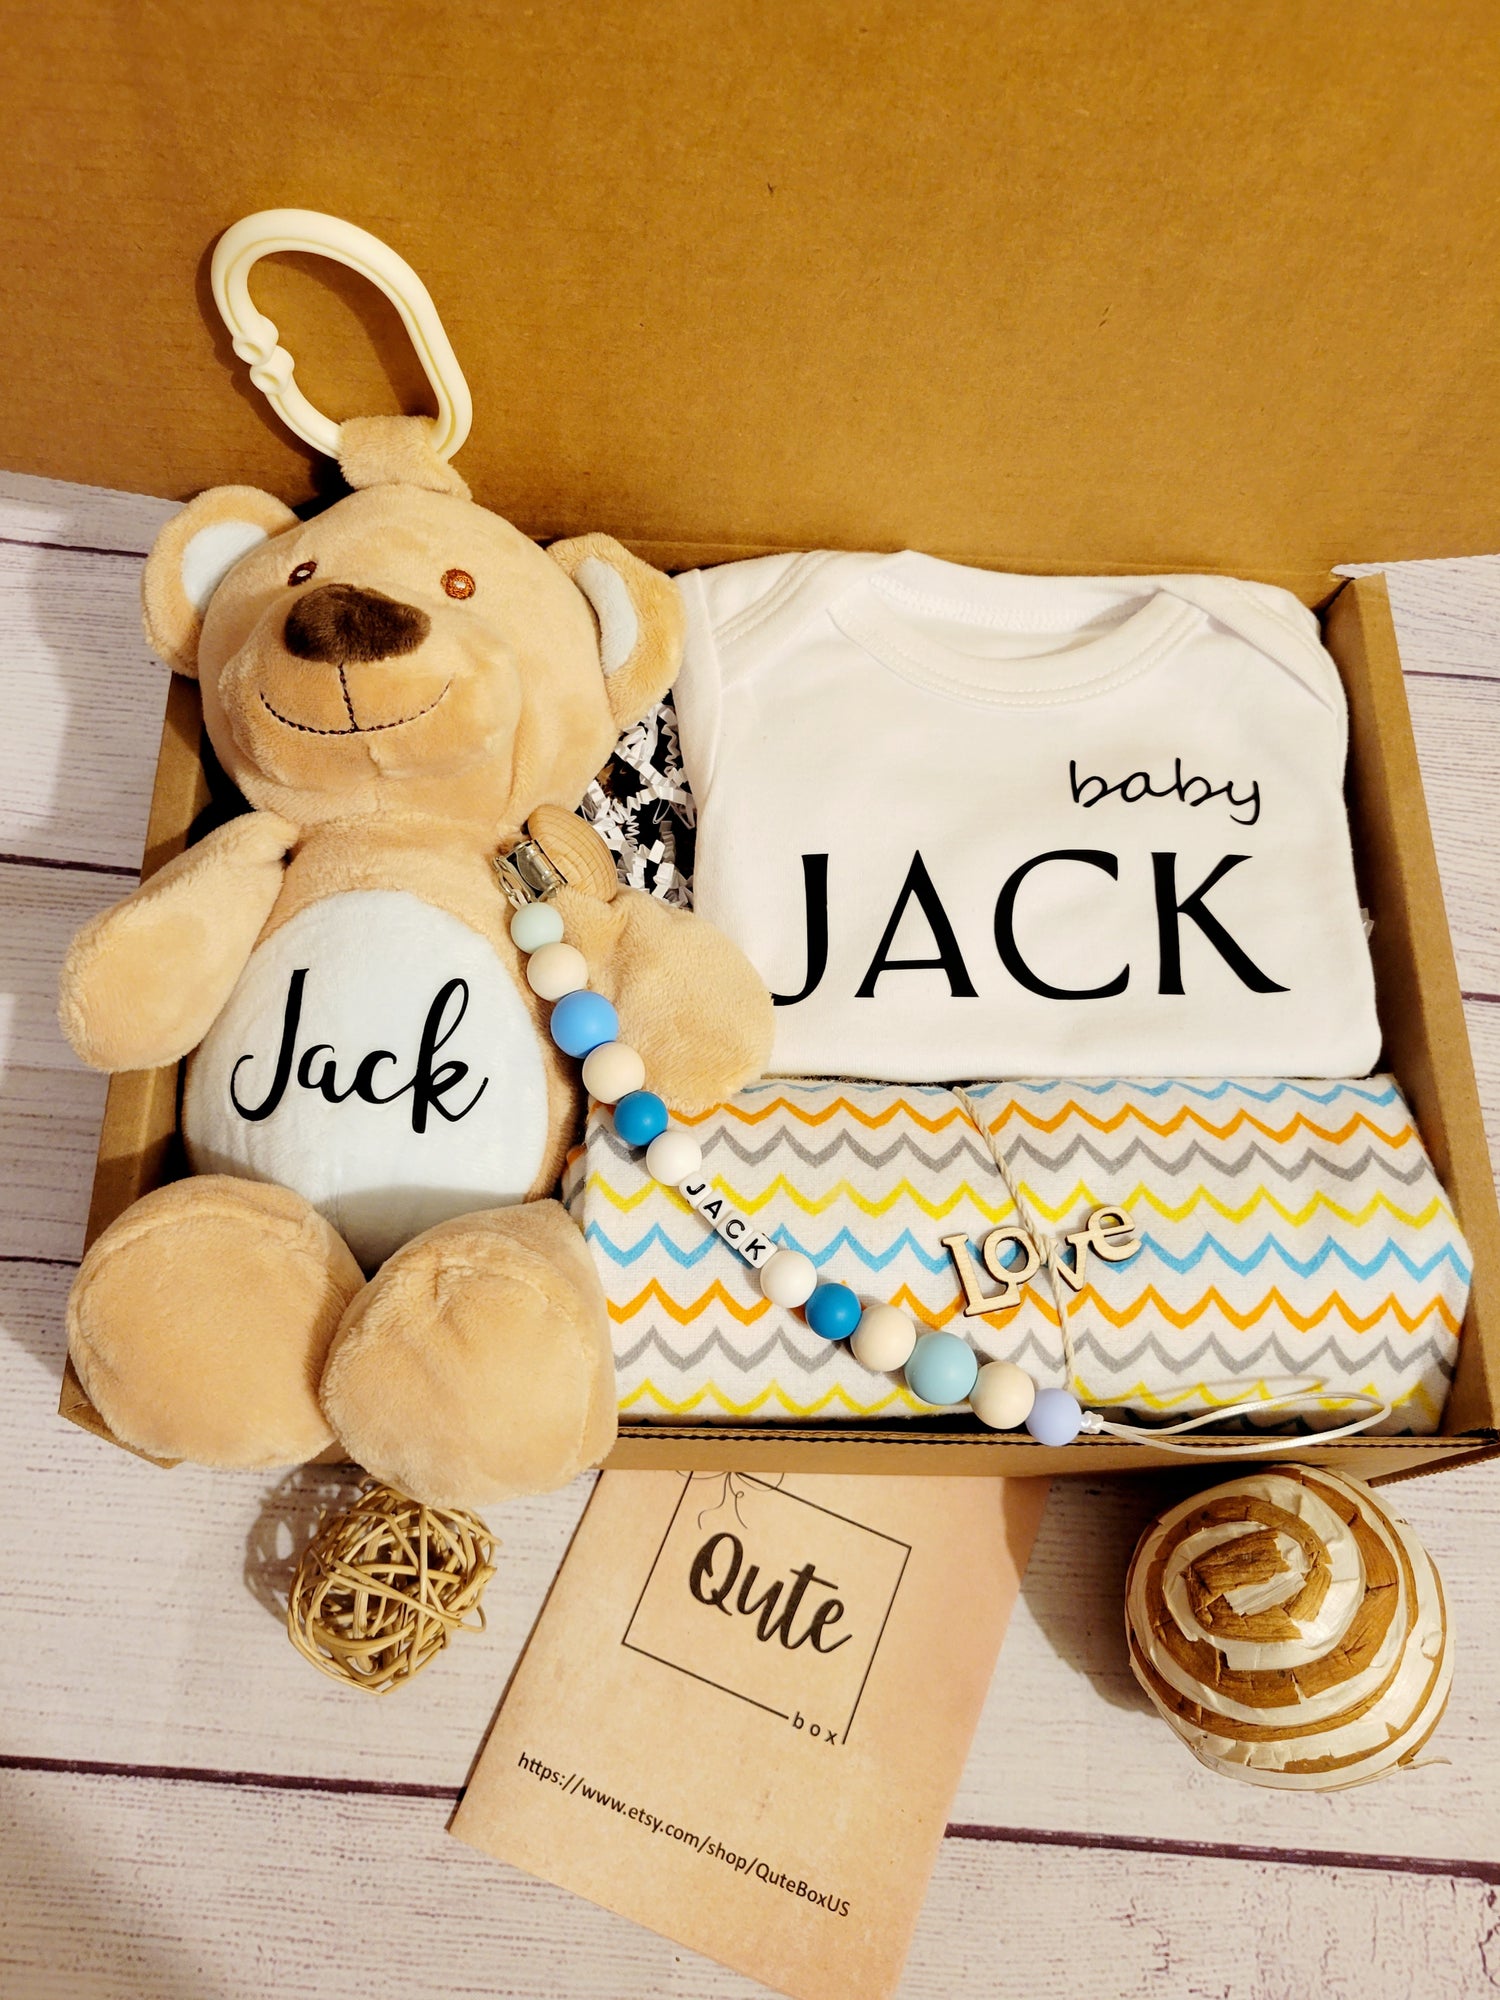 Personalized baby gift boxes